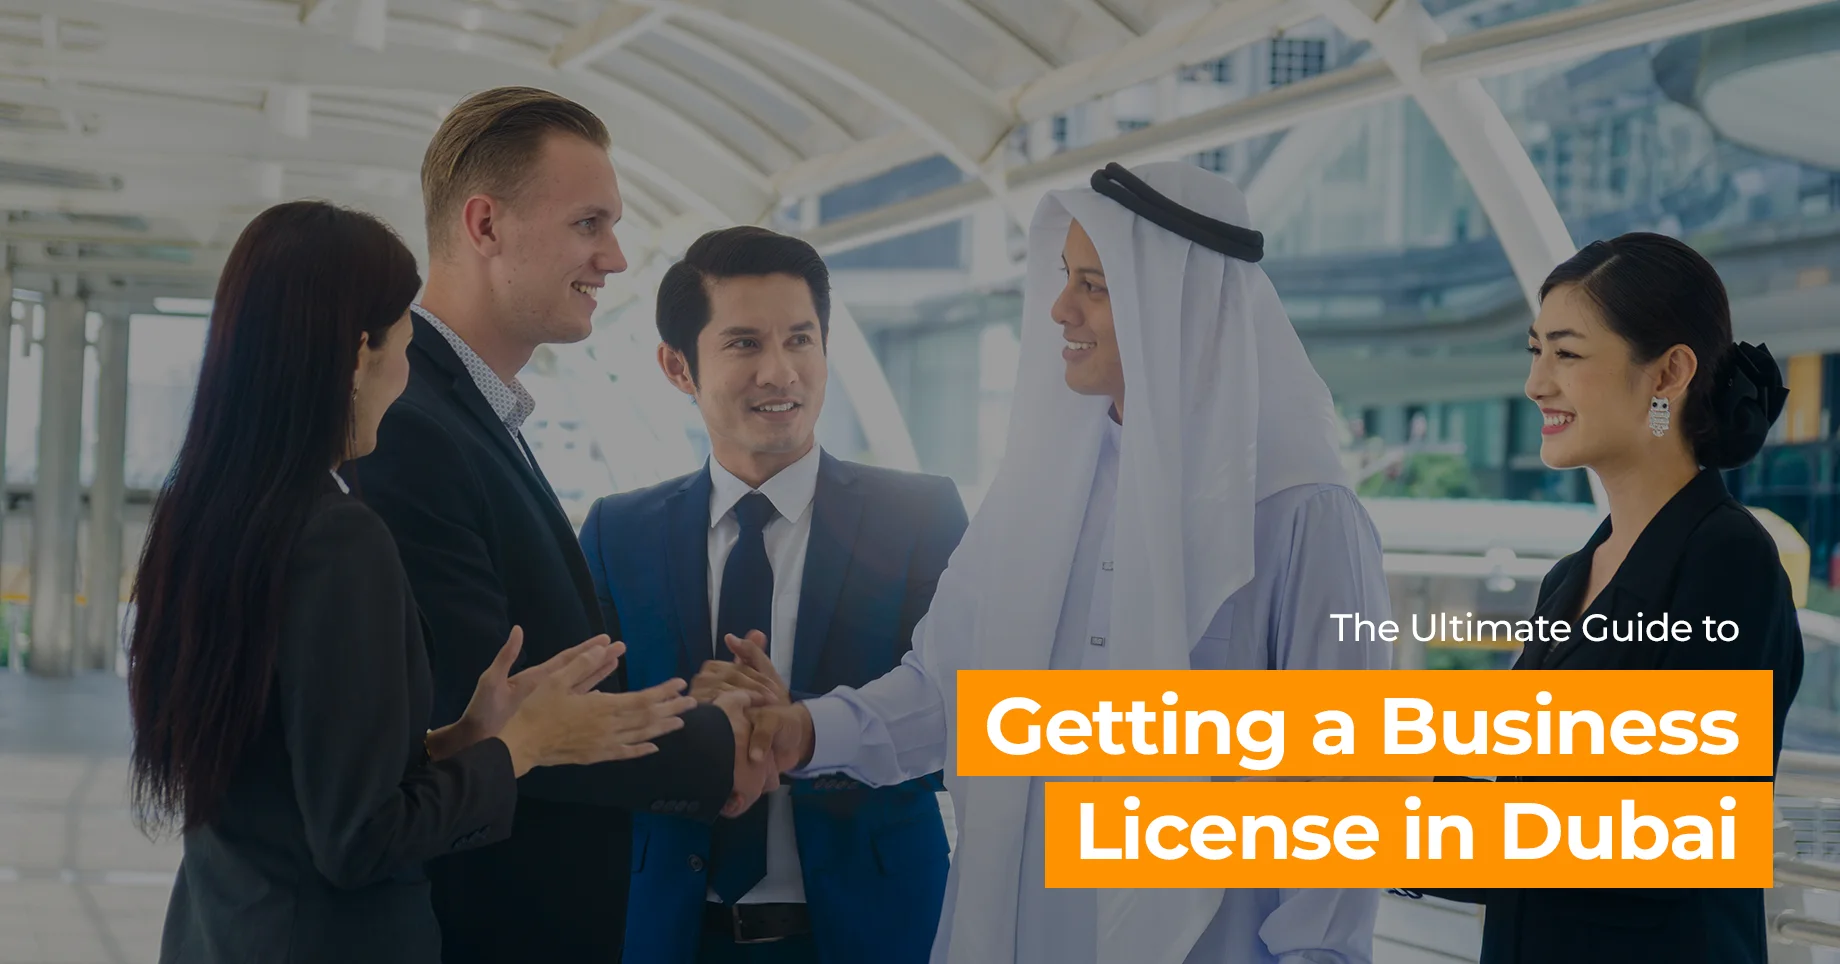 The Ultimate Guide to Getting a Business License in Dubai